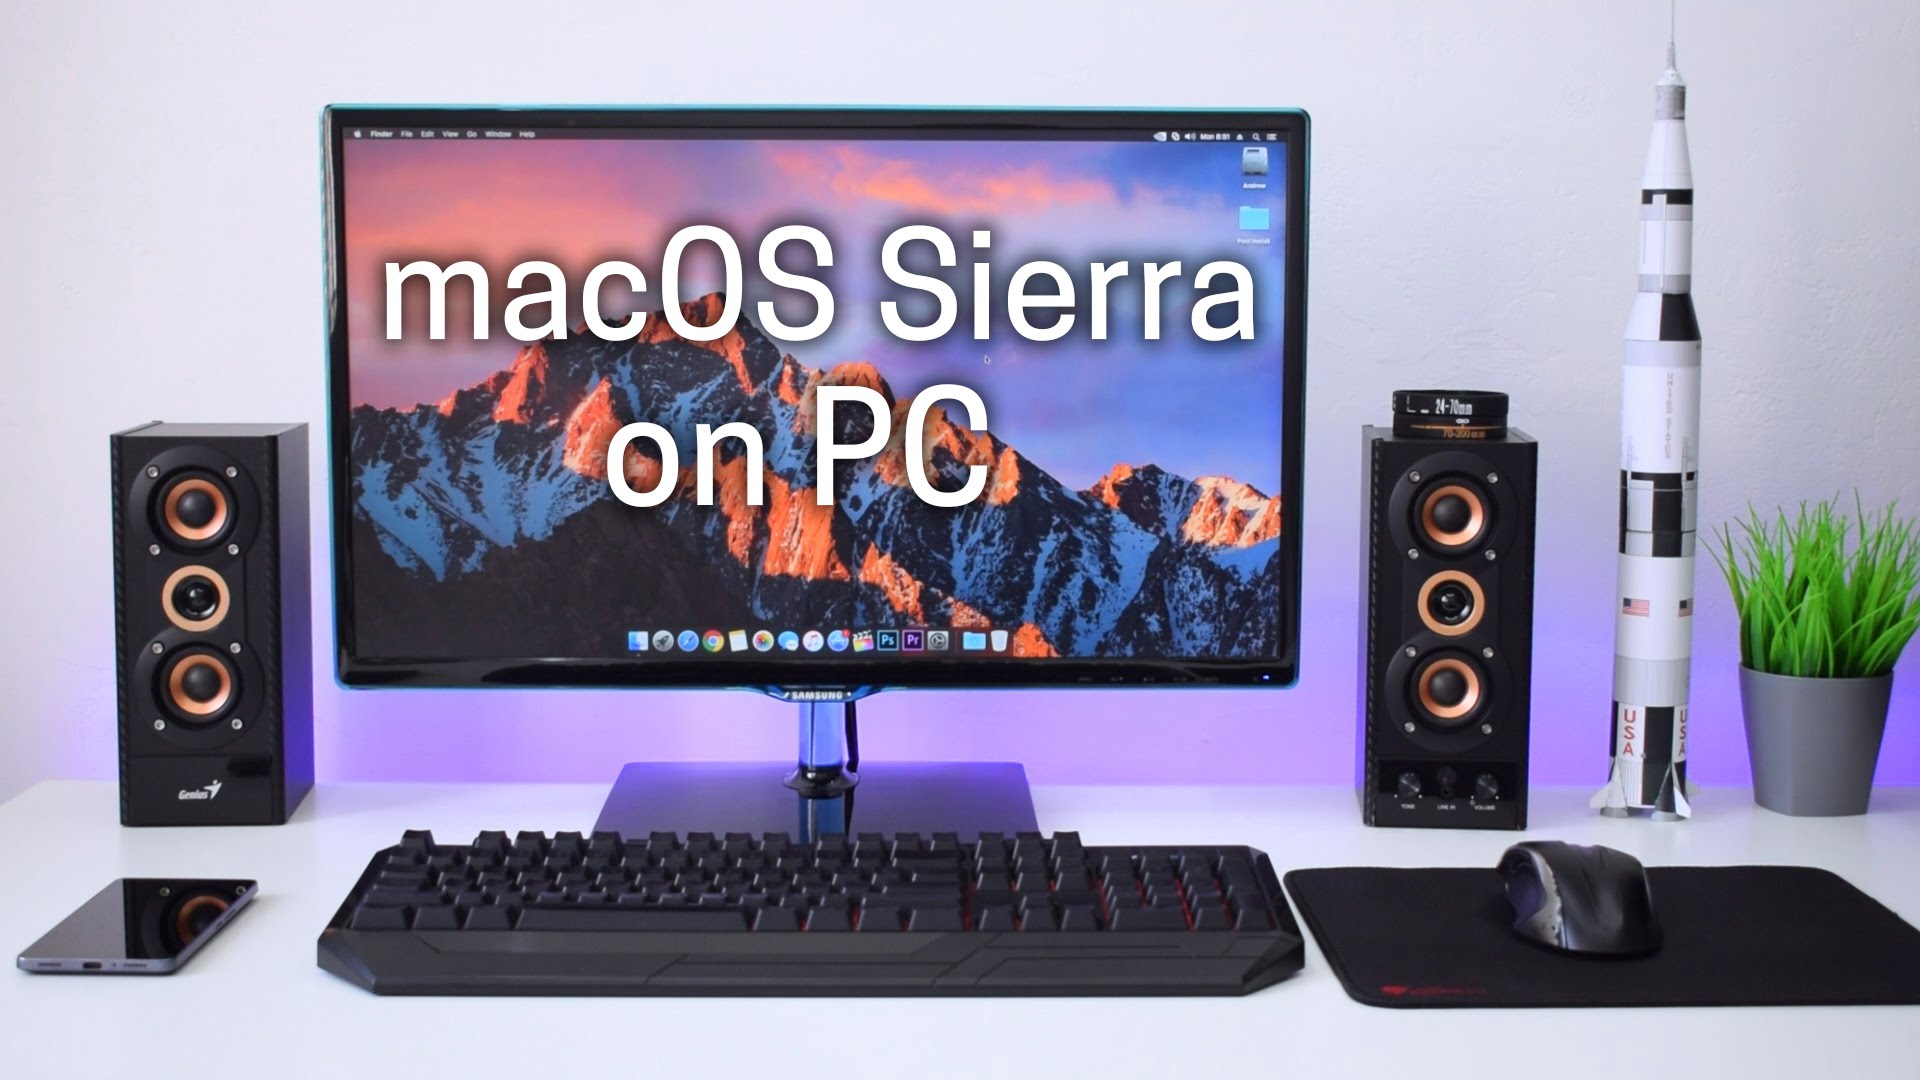 Can you install a mac os on a pc